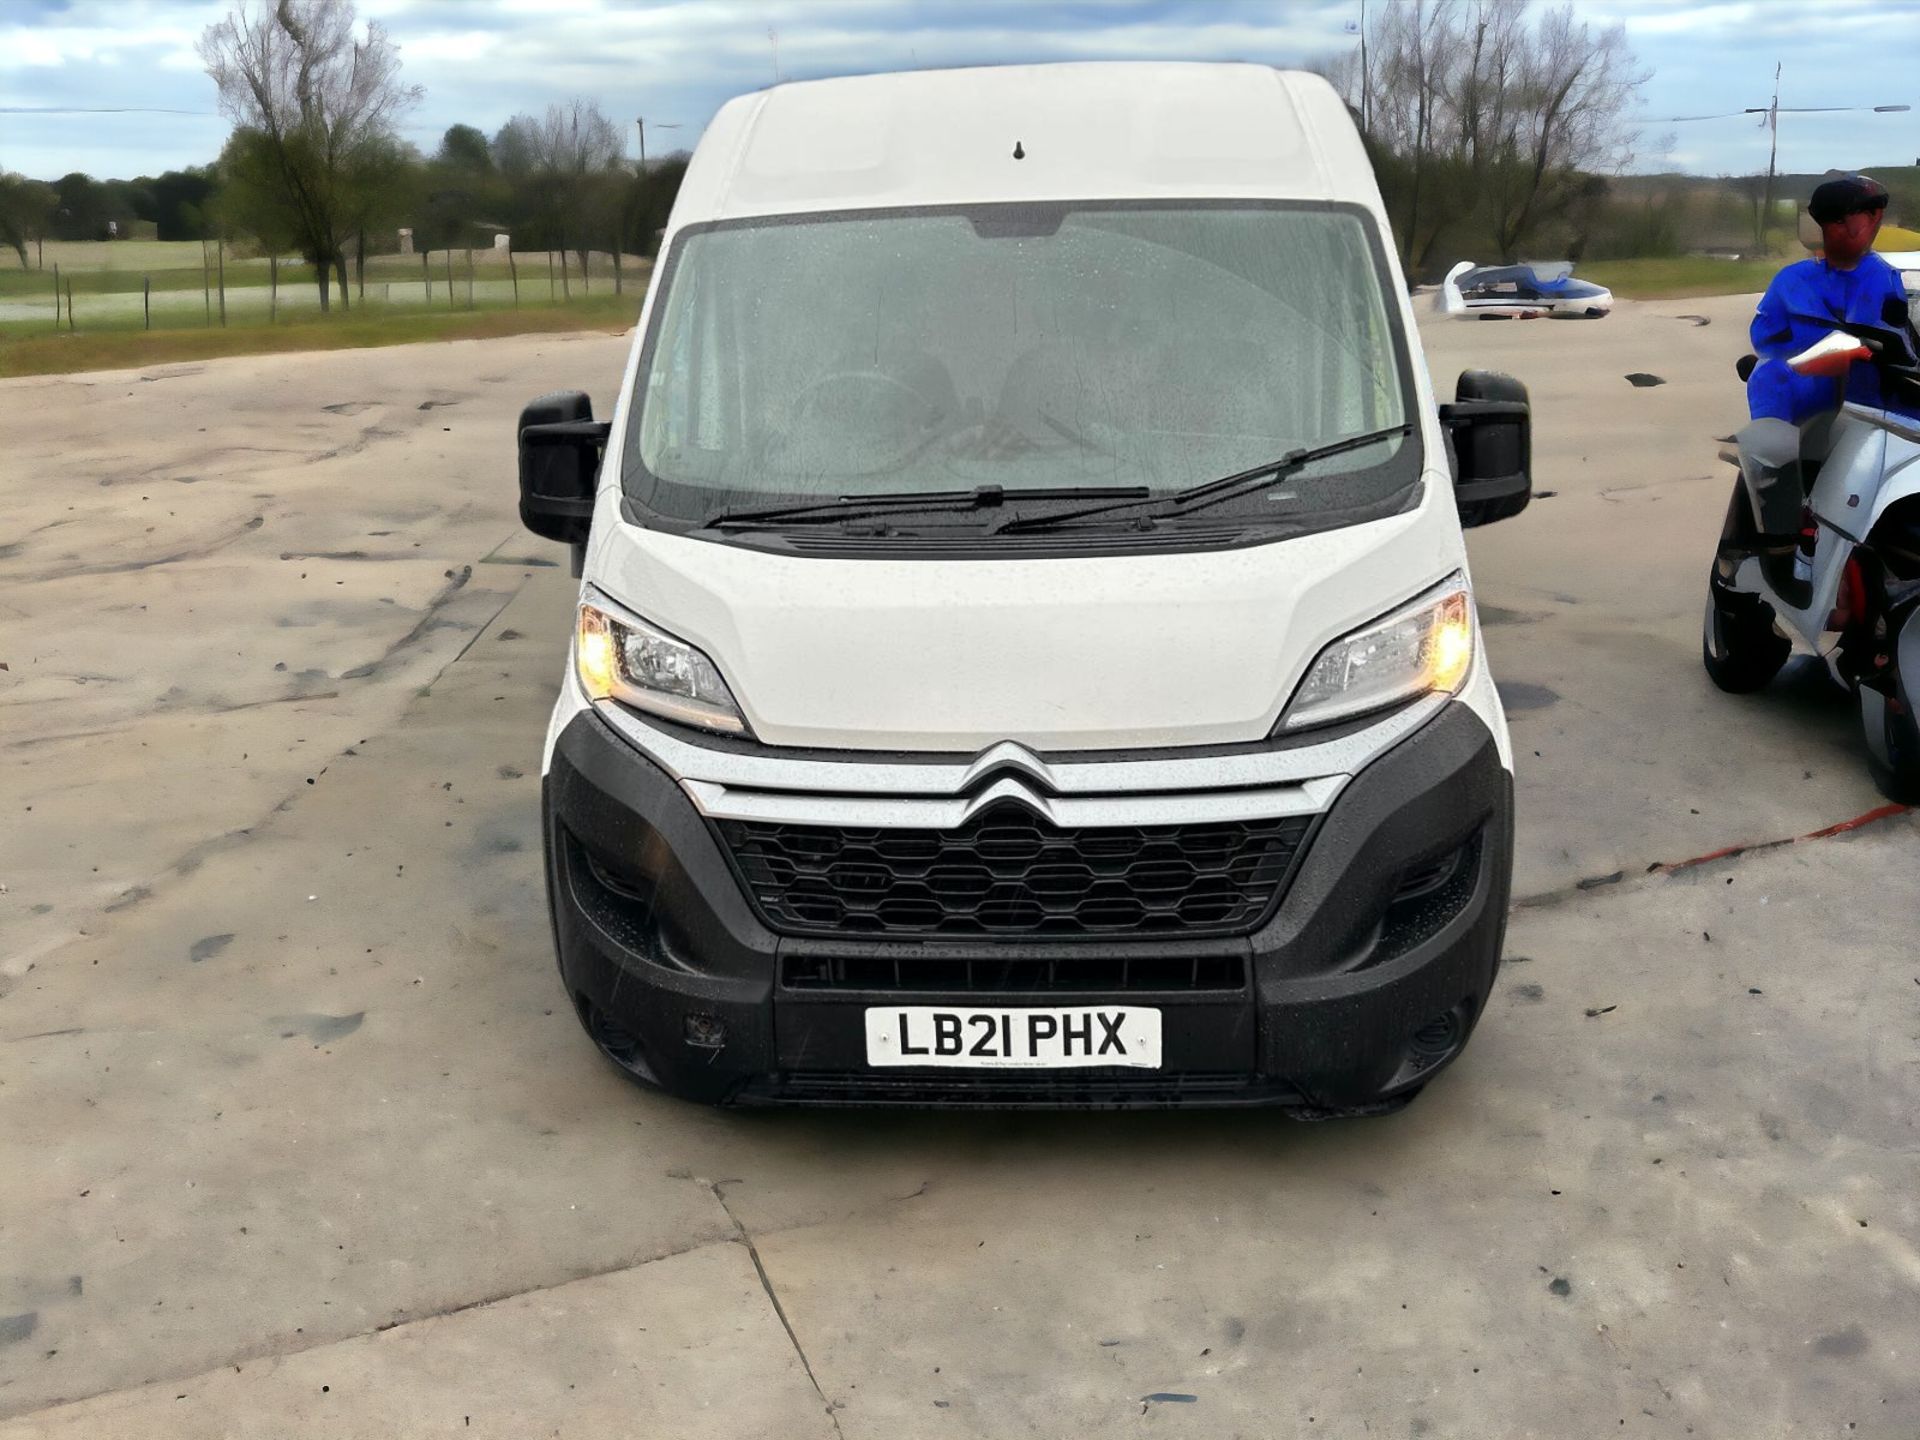 2021-21 REG CITROEN RELAY 35 L3H2 BHDI -HPI CLEAR - READY FOR WORK! - Image 3 of 13